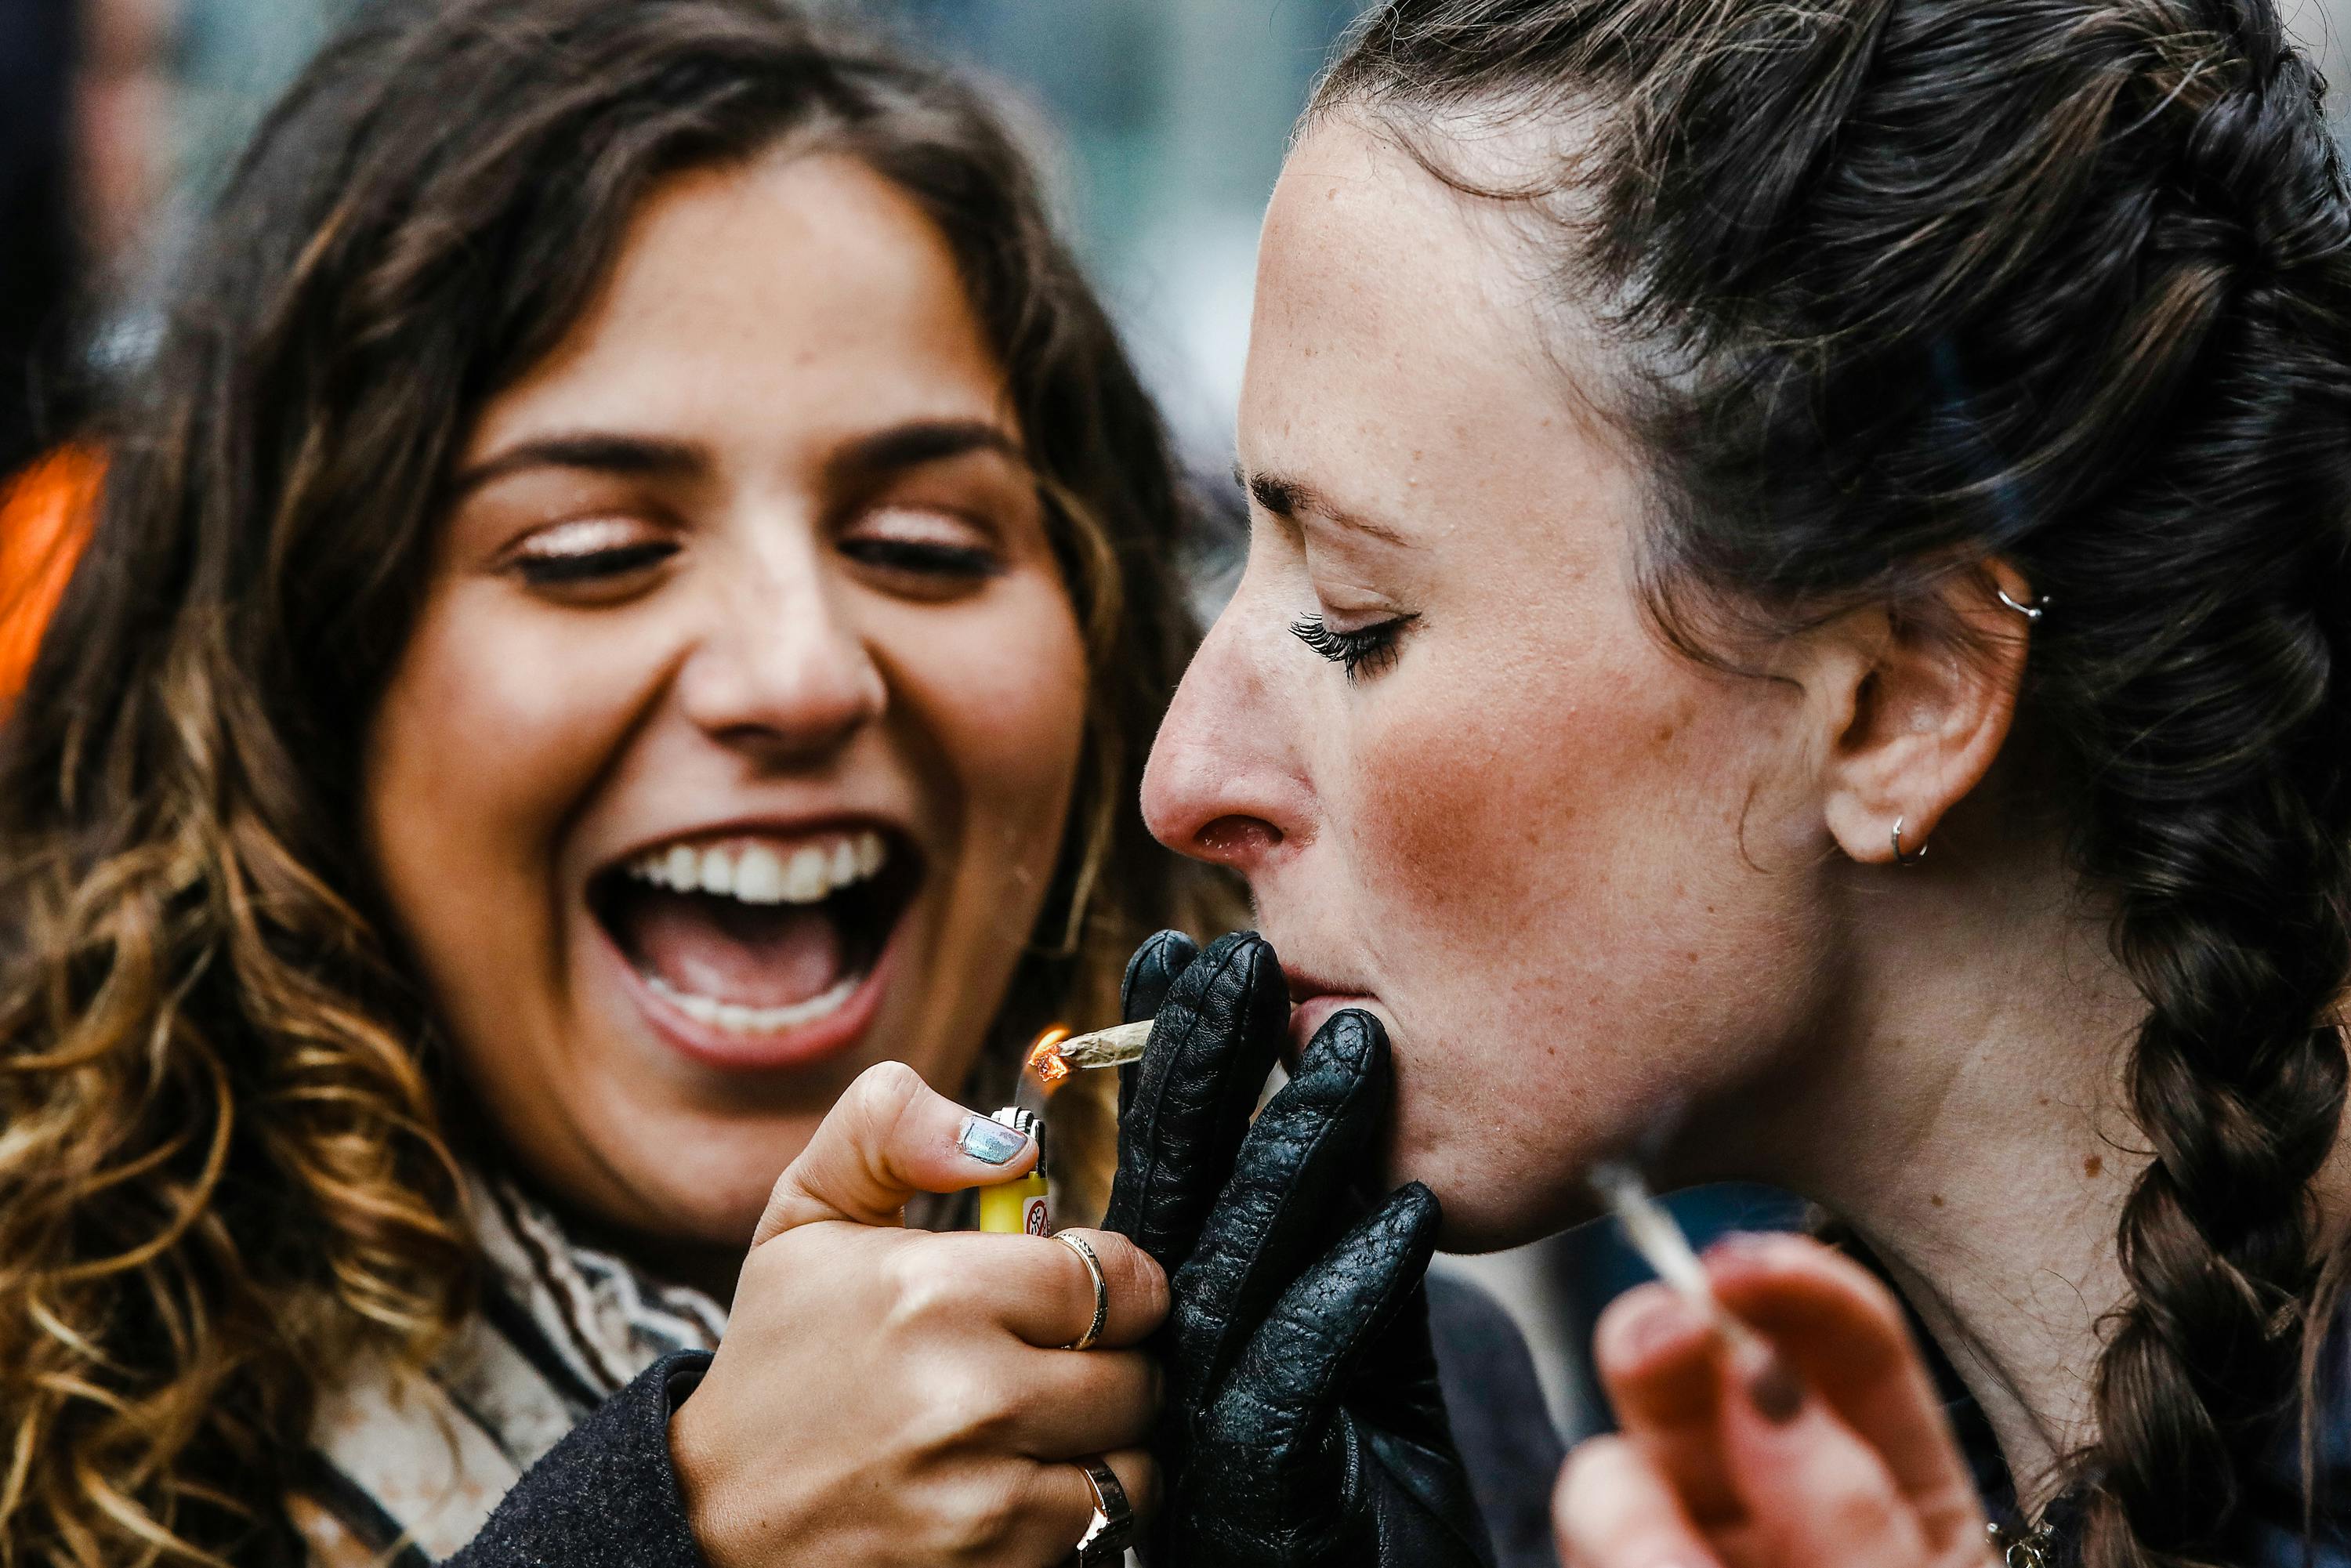 Wondering how to find 420 friends in an illegal state? Read Herb's guide. Here, two girls are shown lighting up together